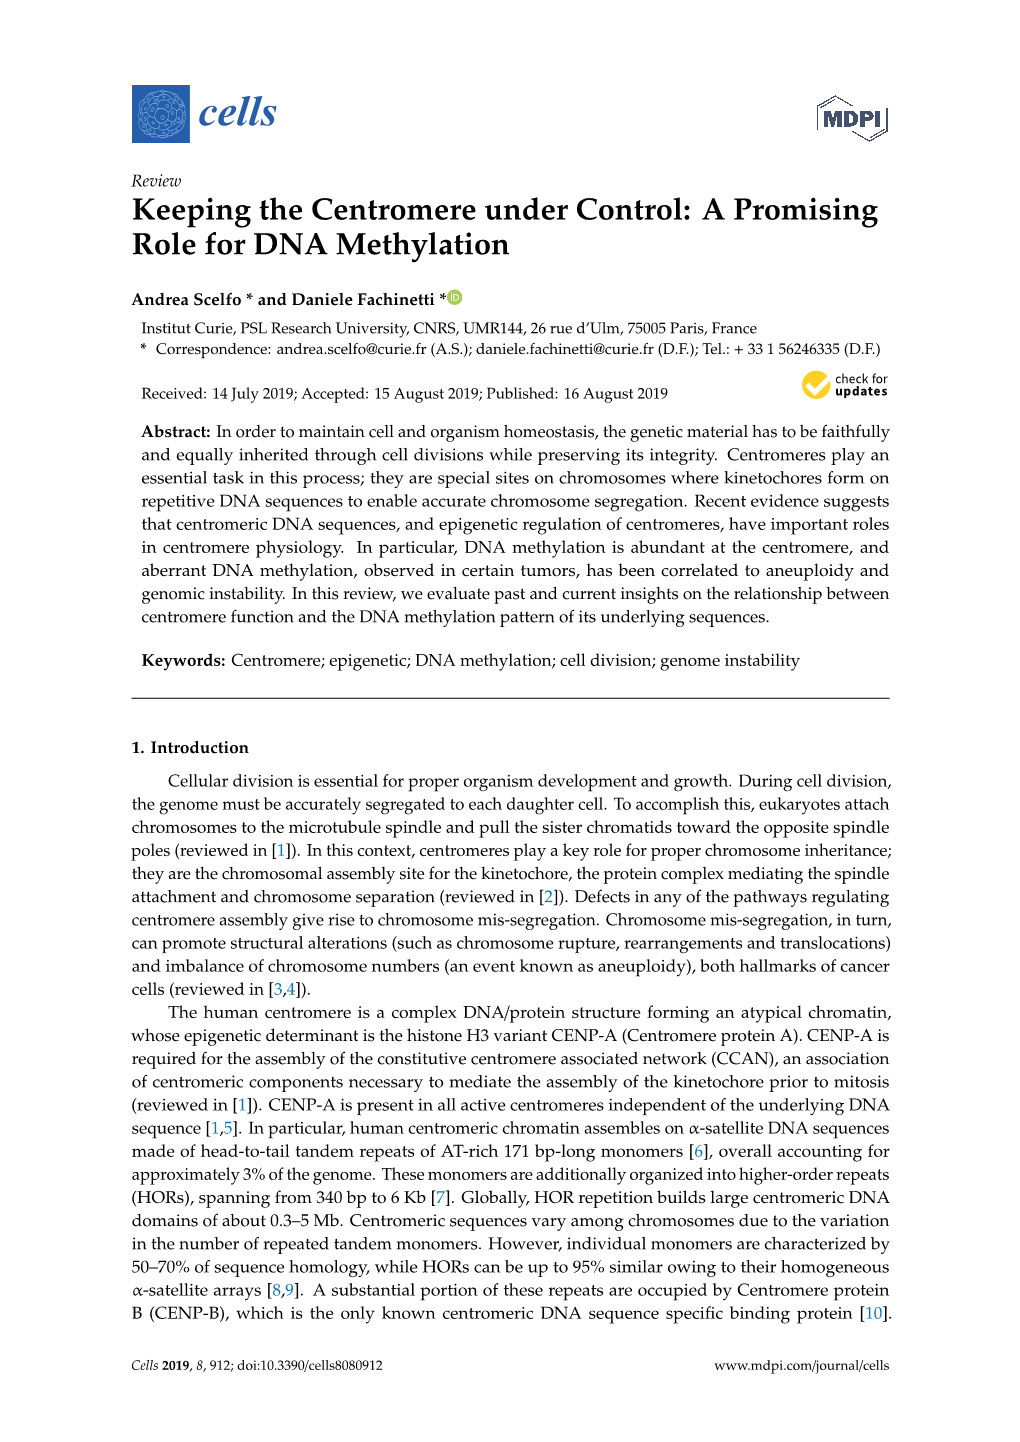 A Promising Role for DNA Methylation